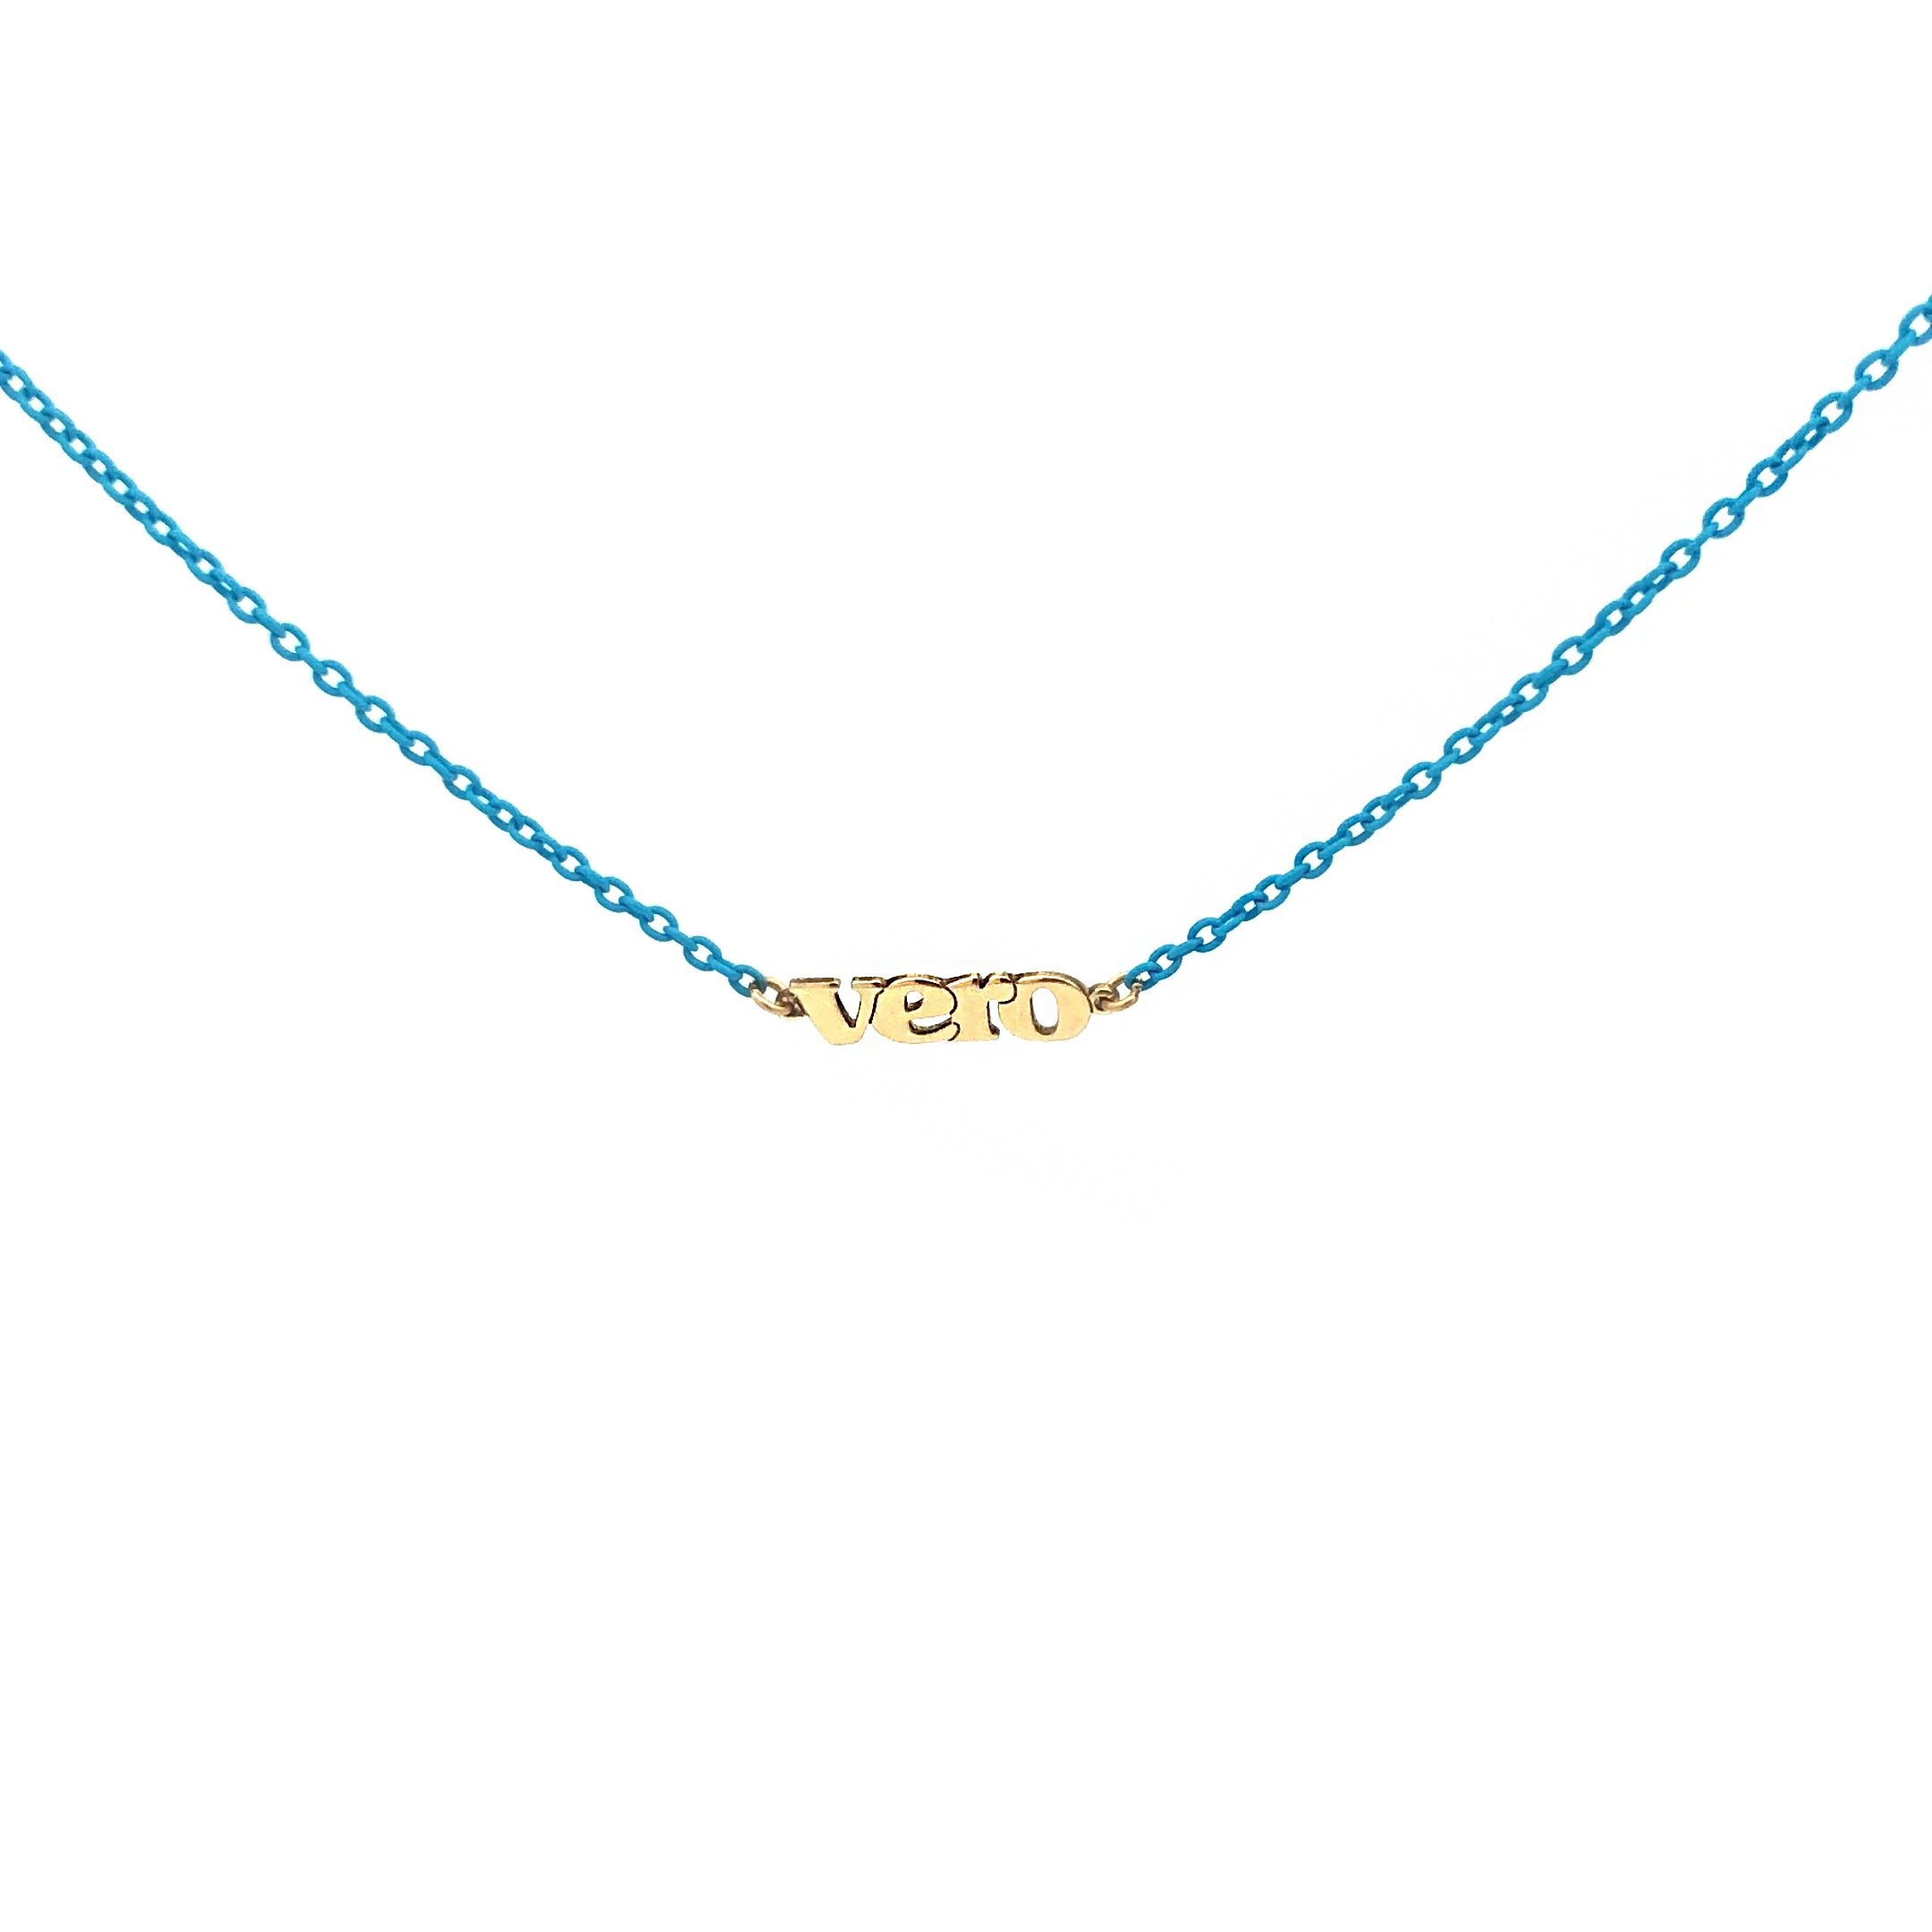 Chokers - Customizable Golden Mate choker colored chain – ORO18KT - 5 | Rue des Mille